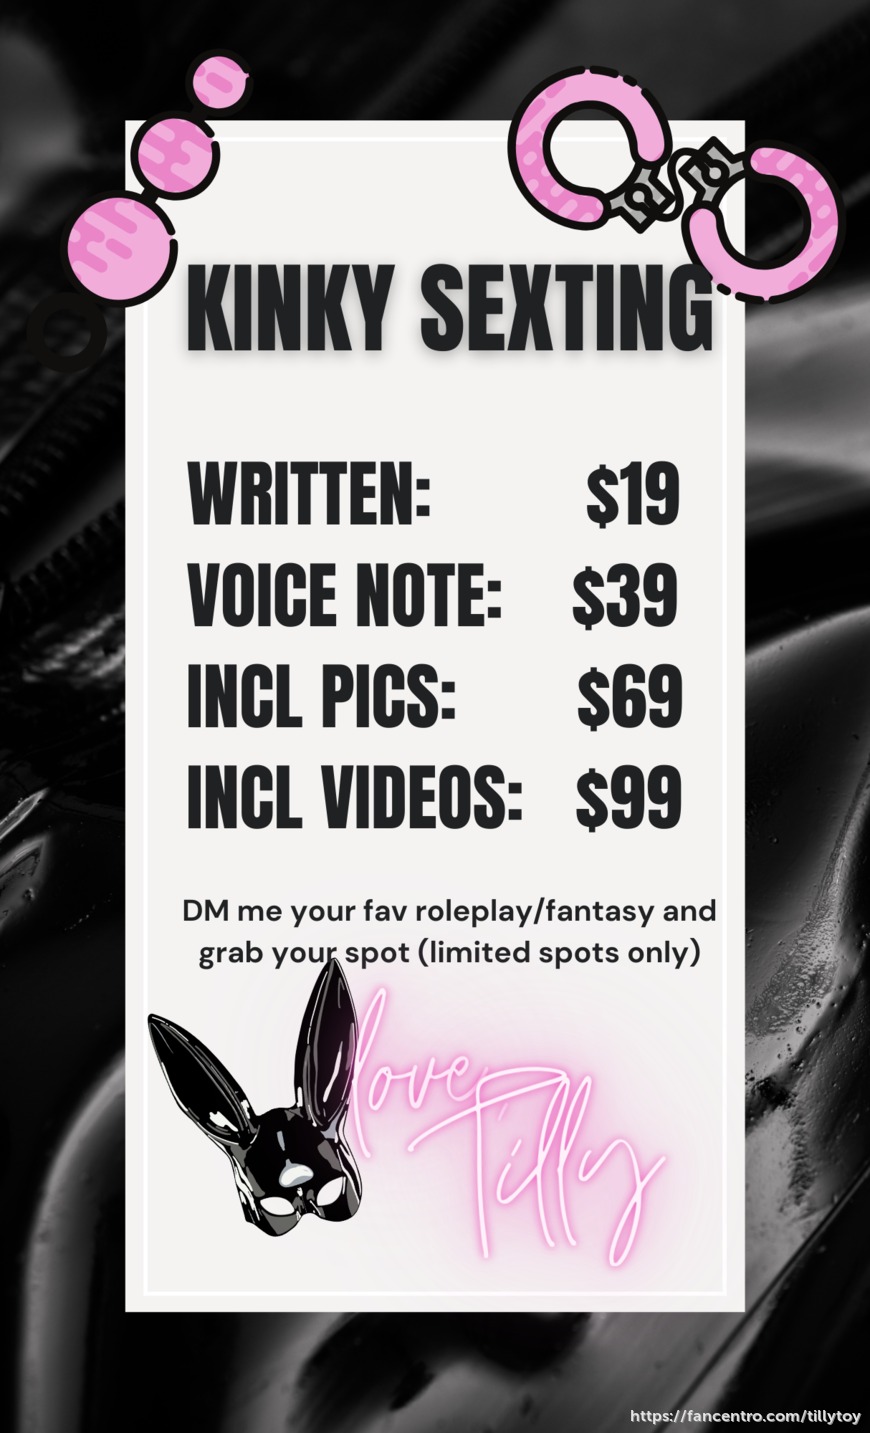 Have you ever had a private sexting session with me being dominant or submissive? Why not try? I'll wait for you😜😈

PS: Offer is limited and valid until Sunday 😈 1